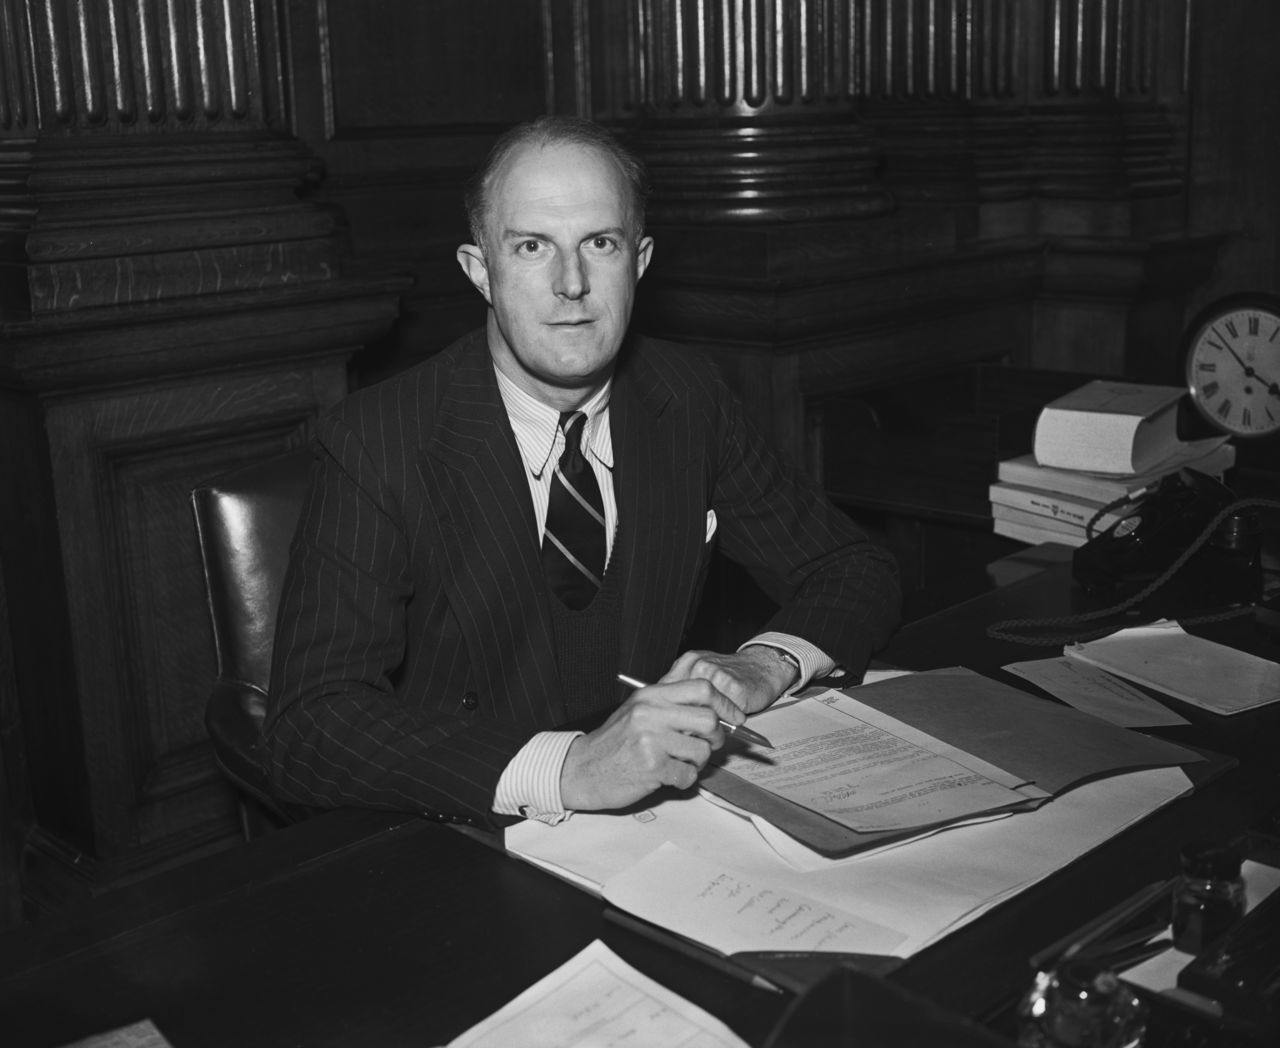 Scottish soldier Fitzroy Maclean is believed to have inspired James Bond.